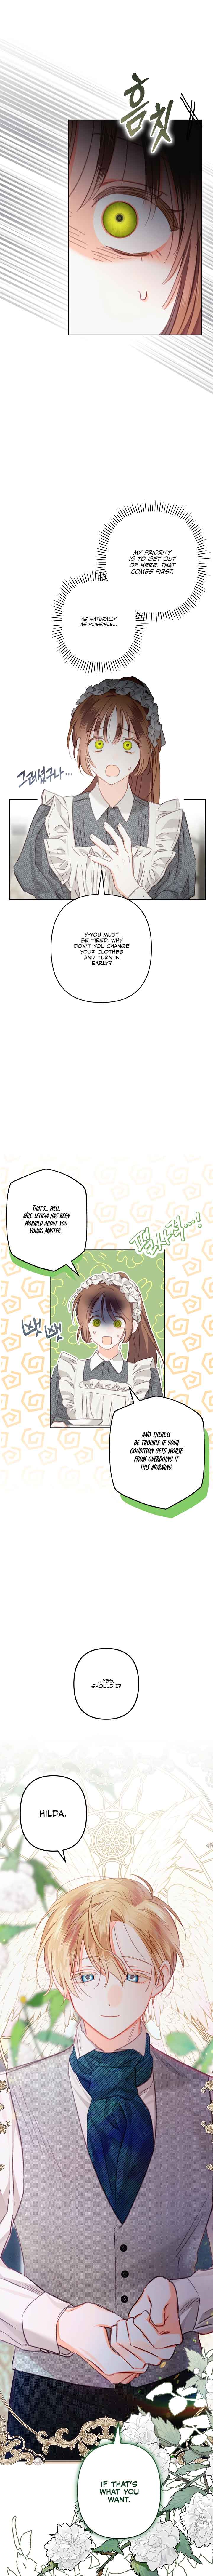 How to Survive as a Maid in a Horror Game Chapter 3 - Page 23